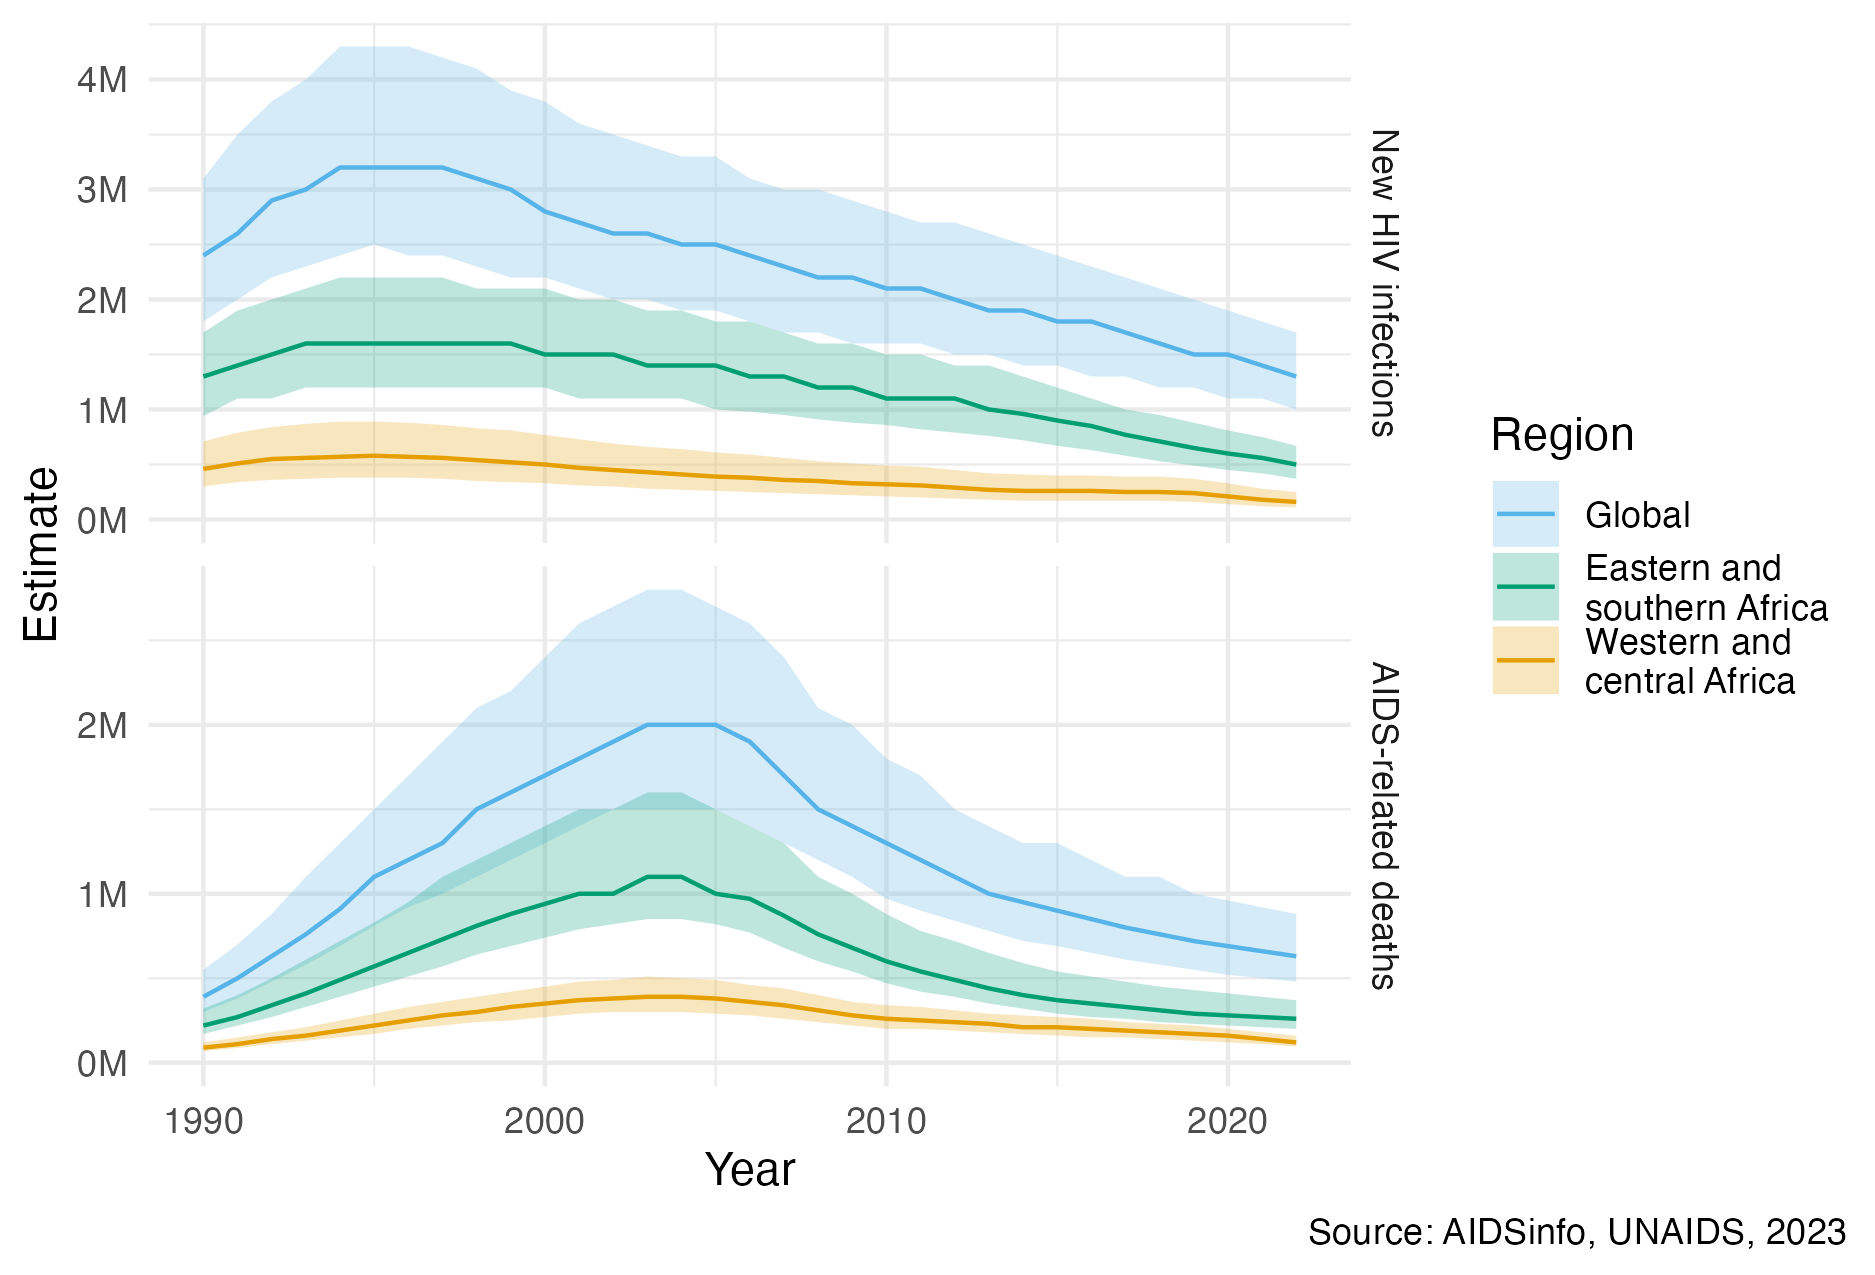 Globally, yearly new HIV infections peaked in 1995, and have since decreased by 59%. Yearly AIDS-related deaths peaked in 2004, and have since decreased by 68% (UNAIDS 2023a). Much of the global disease burden is concentrated in eastern and southern Africa, as well as western and central Africa. The unit “M” refers to millions. The colour palette used in this figure, and throughout the thesis, is that of Okabe and Ito (2008). It is designed to be colourblind friendly, and the default used by Wilke (2019).